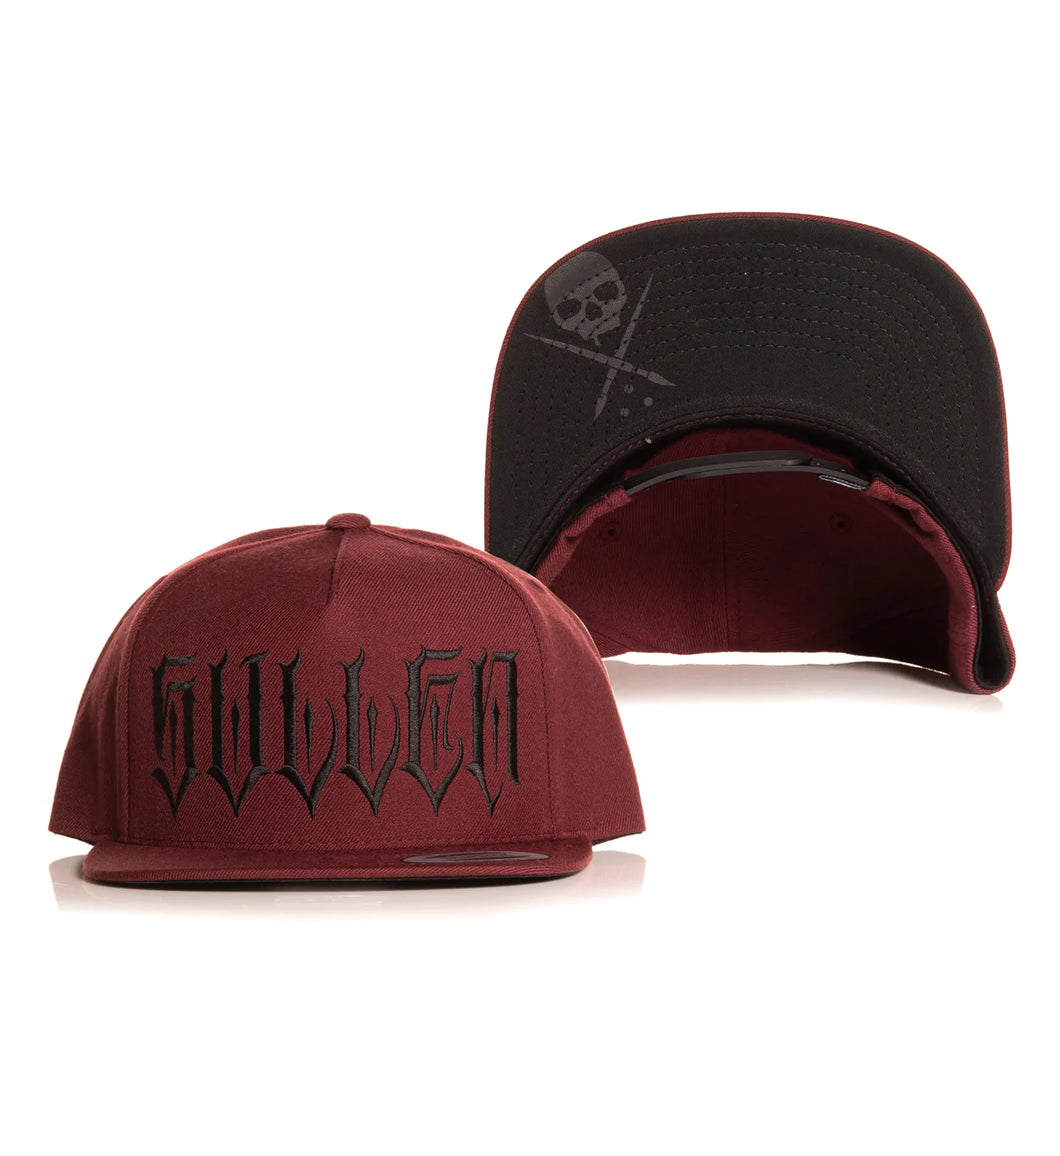 red snapback with sullen badge and tattoo font